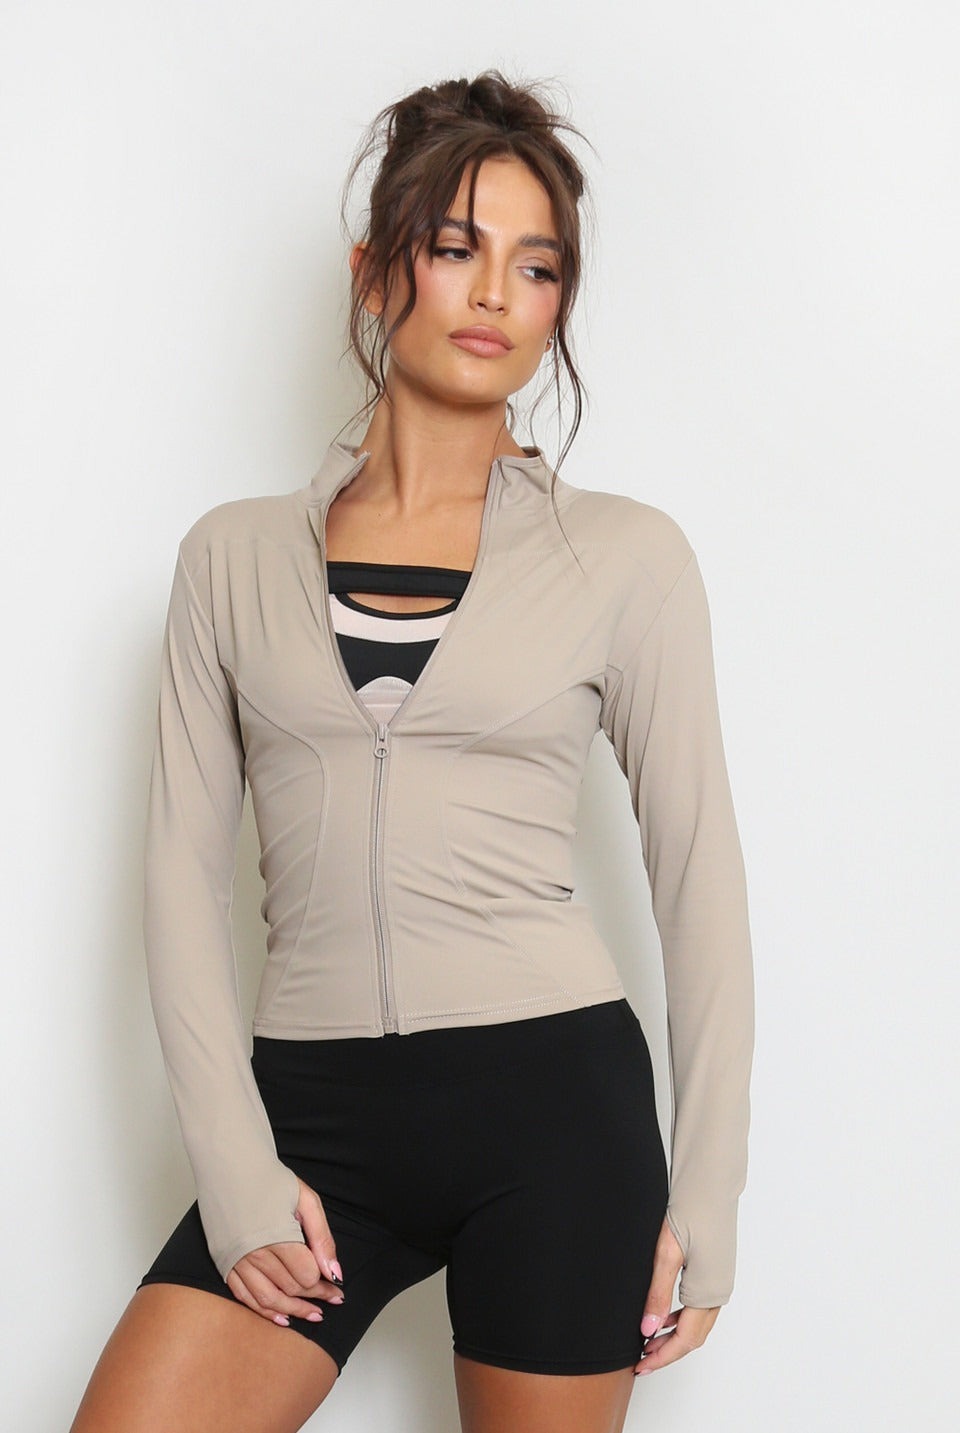 Stone Fitted Energy Long Sleeve Gym Top - Mila - Storm Desire